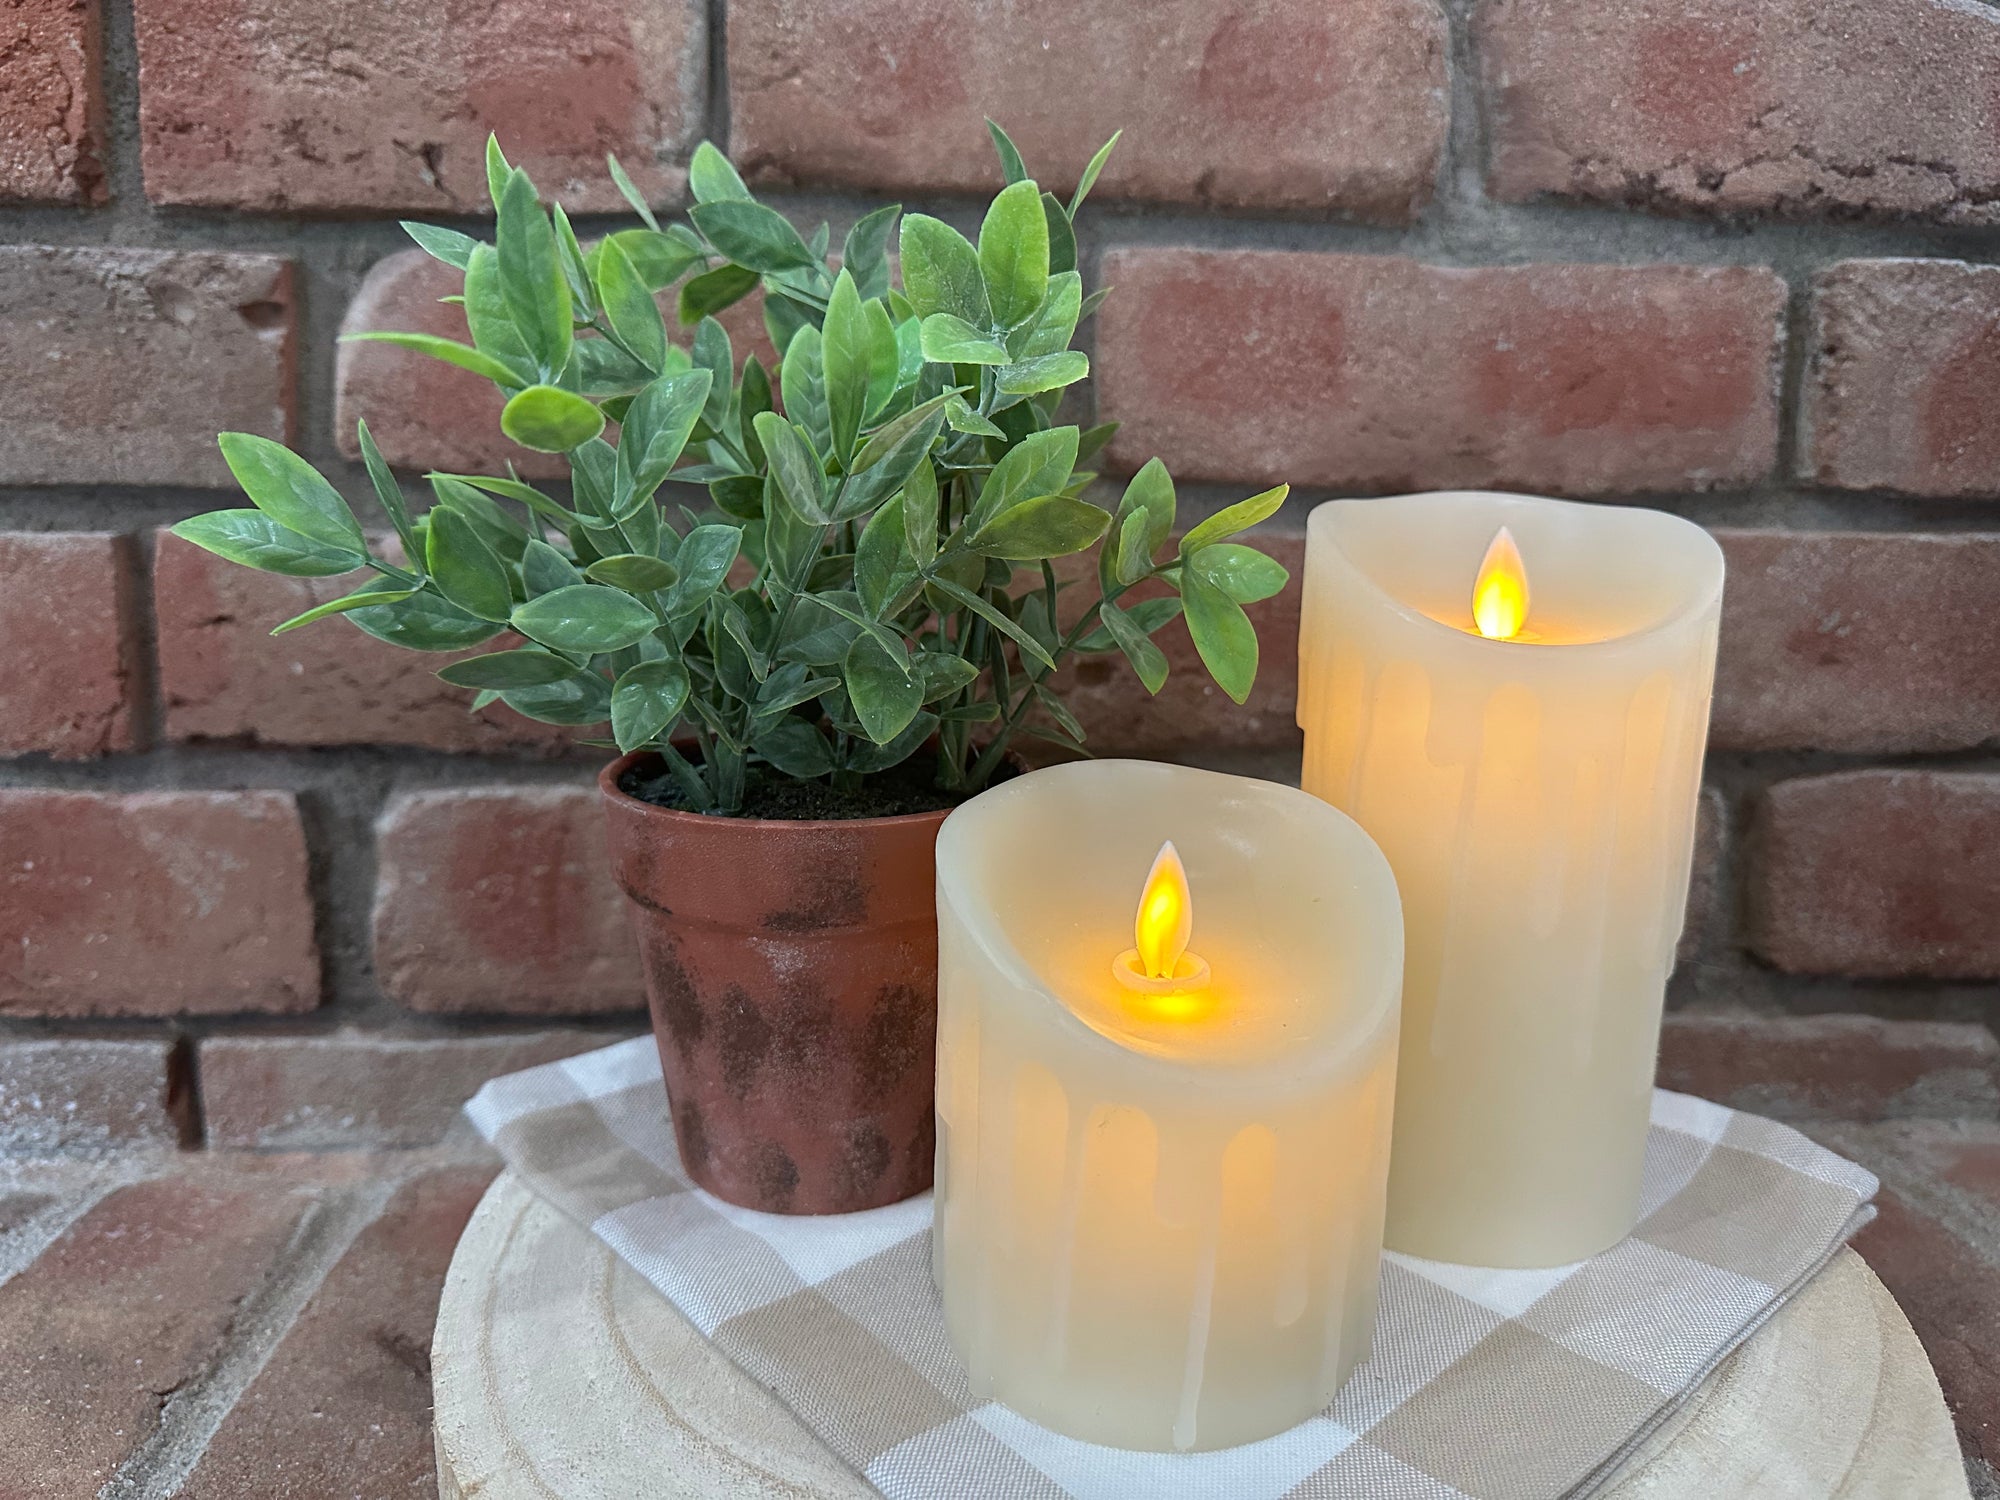 Moving Flame Pillar Candle - 2 Sizes